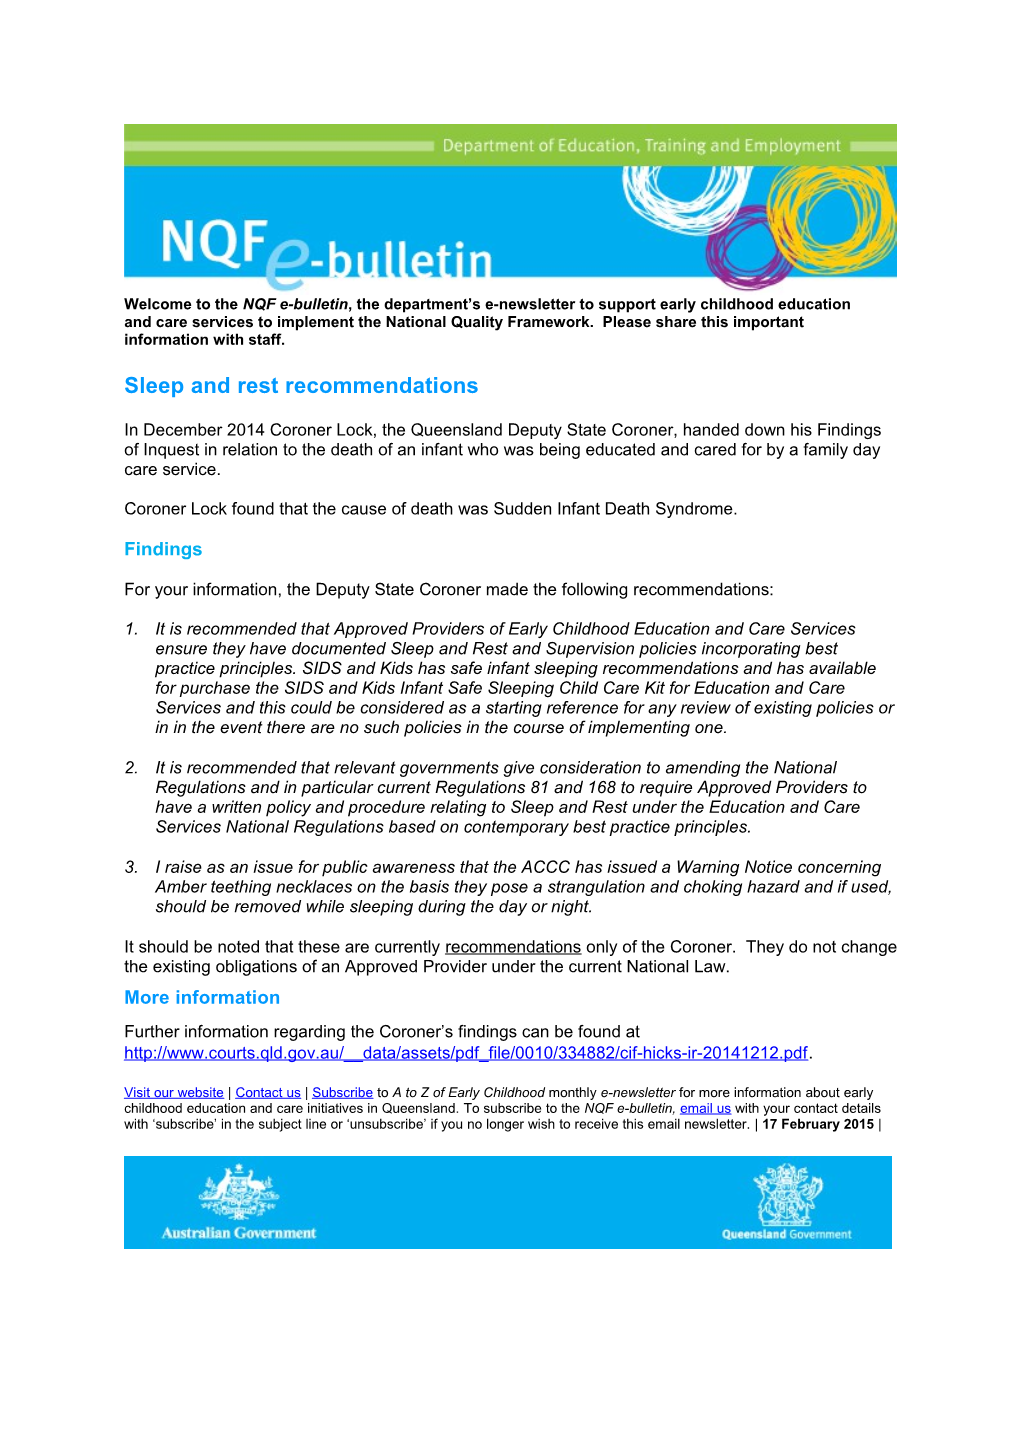 NQF E-Bulletin - Sleep and Rest Recommendations